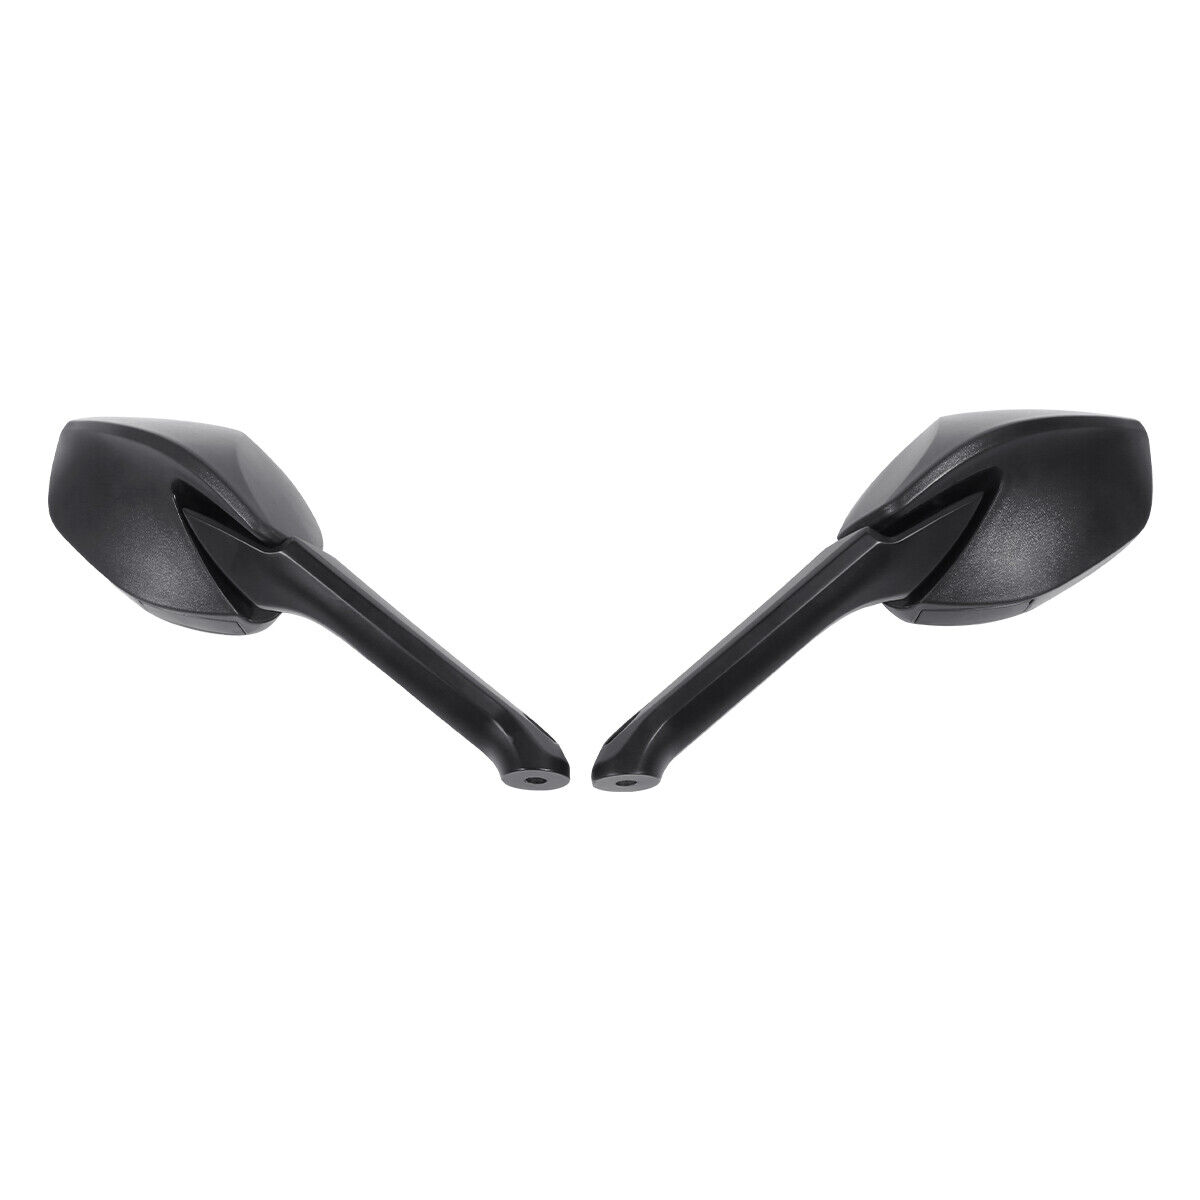 Rear View Rearview Mirrors Fit For Ducati Multistrada 1200 2010-2014 2013 2012